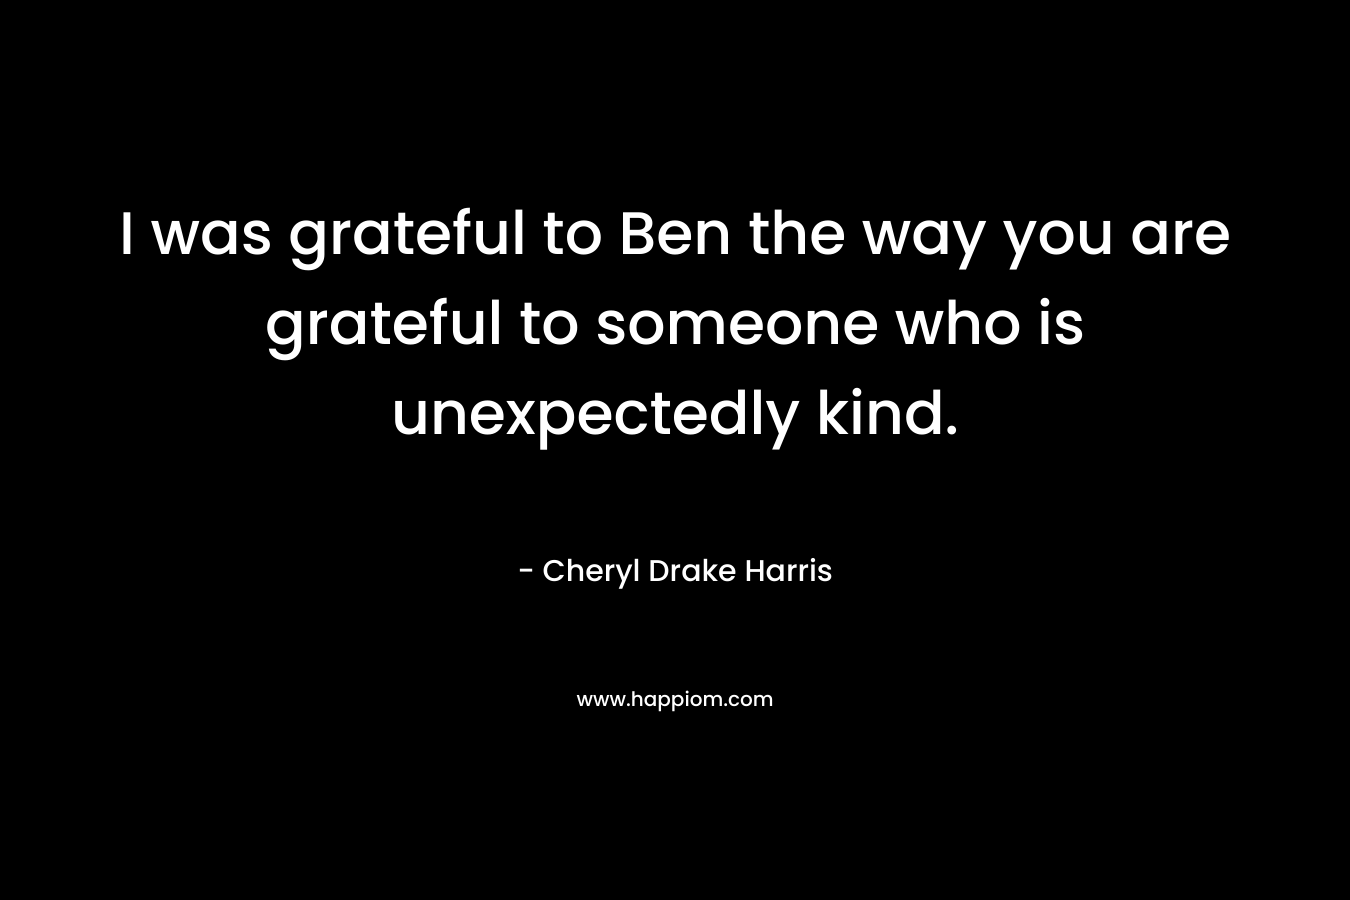 I was grateful to Ben the way you are grateful to someone who is unexpectedly kind.